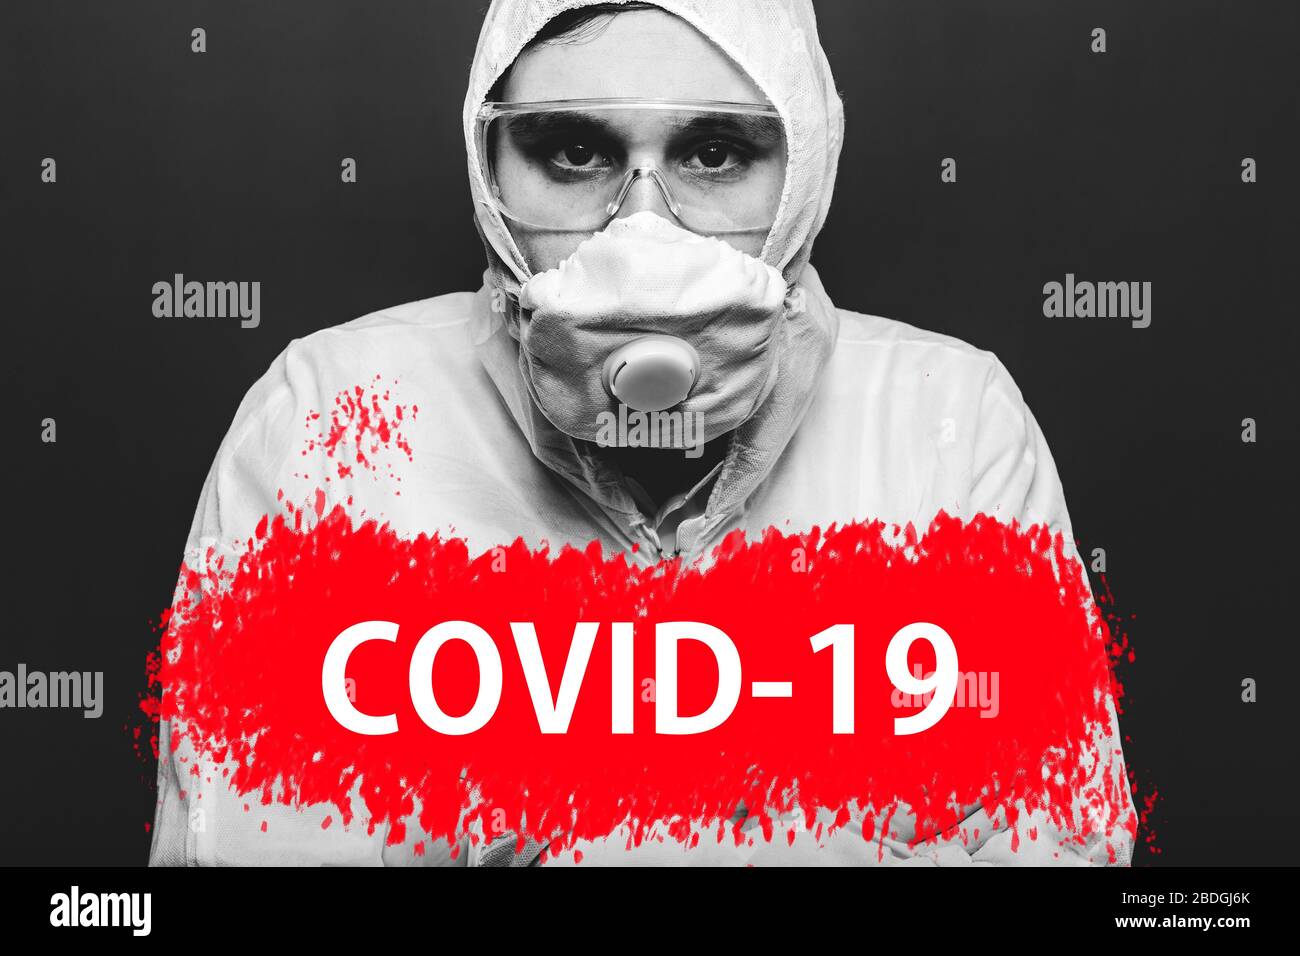 Text covid-19 on red warning sign on portret of man in biohazard chemical protective suit and face mask. Coronavirus pandemic quarantine zone. Concept Stock Photo